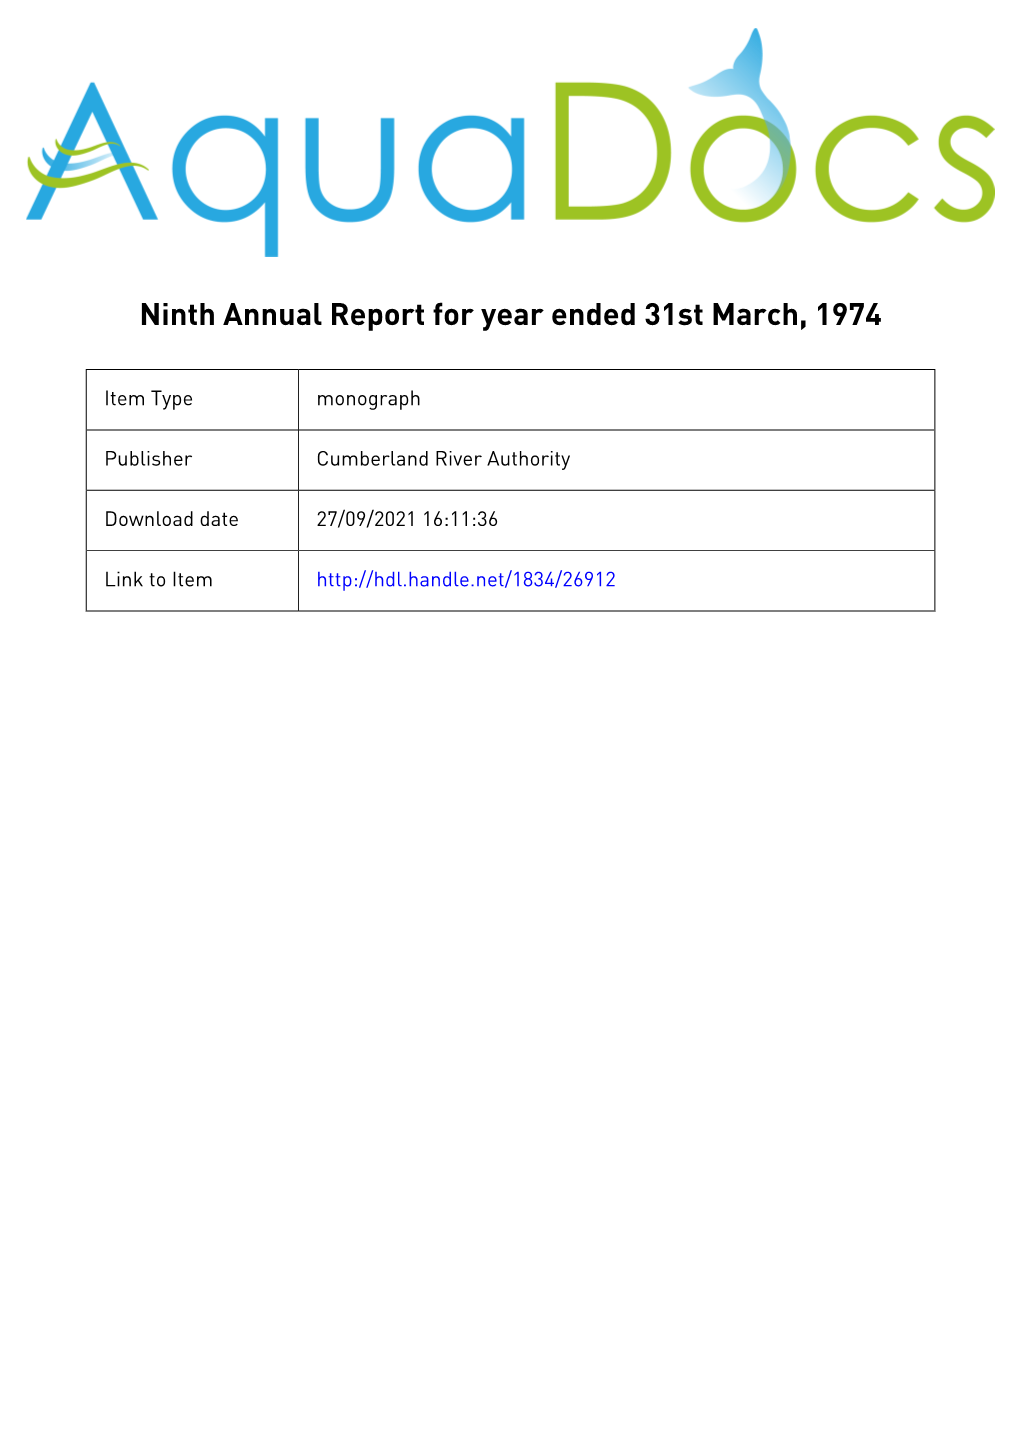 Ninth Annual Report for Year Ended 31St March, 1974